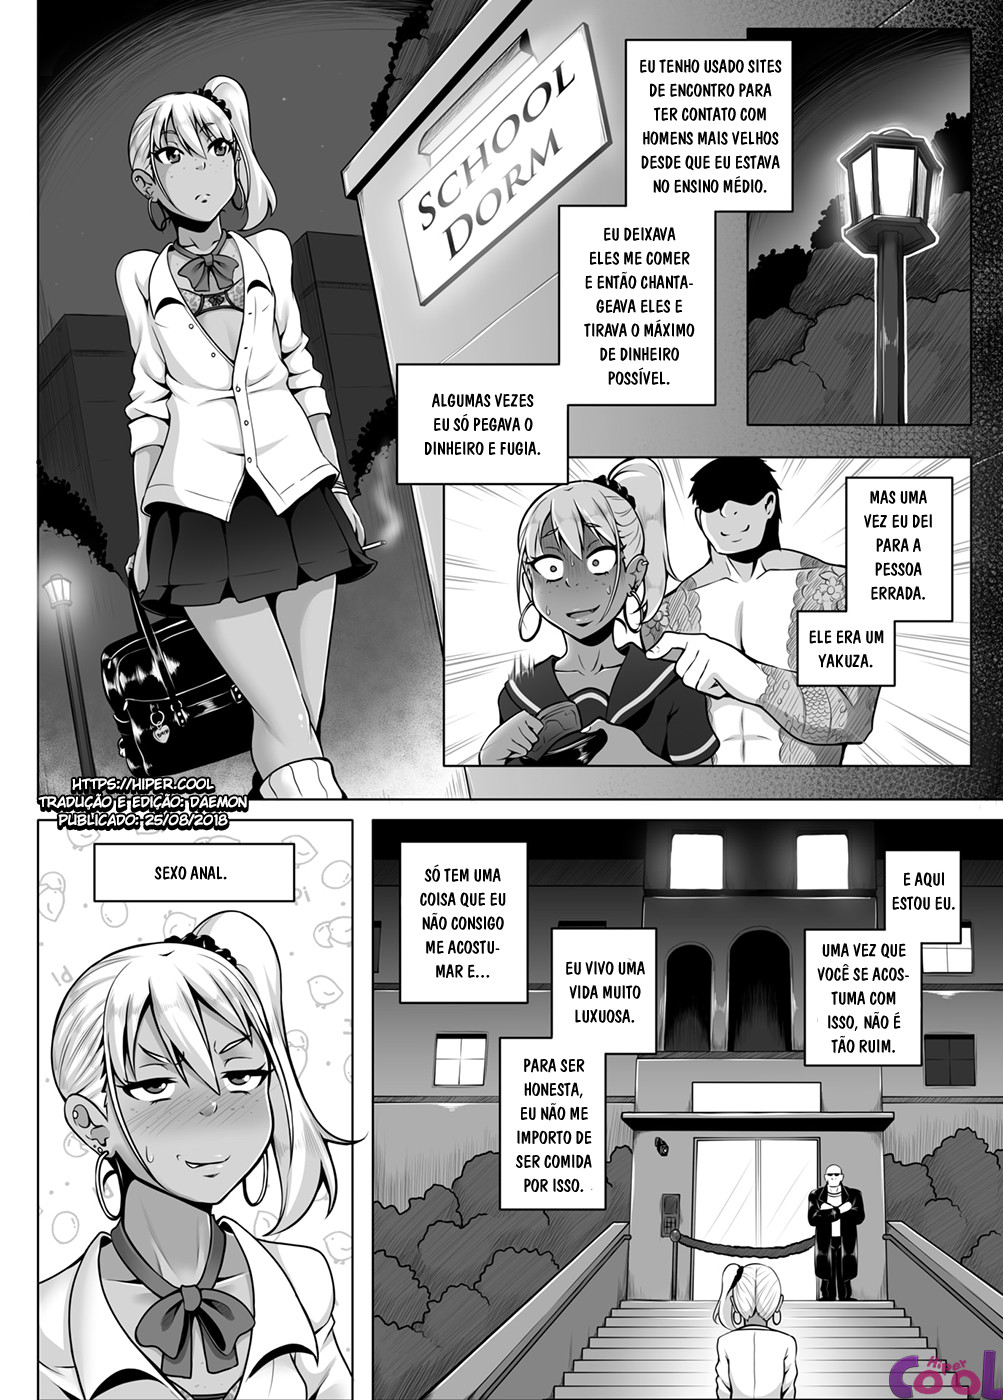 shady-dealings-chapter-07-page-03.jpg